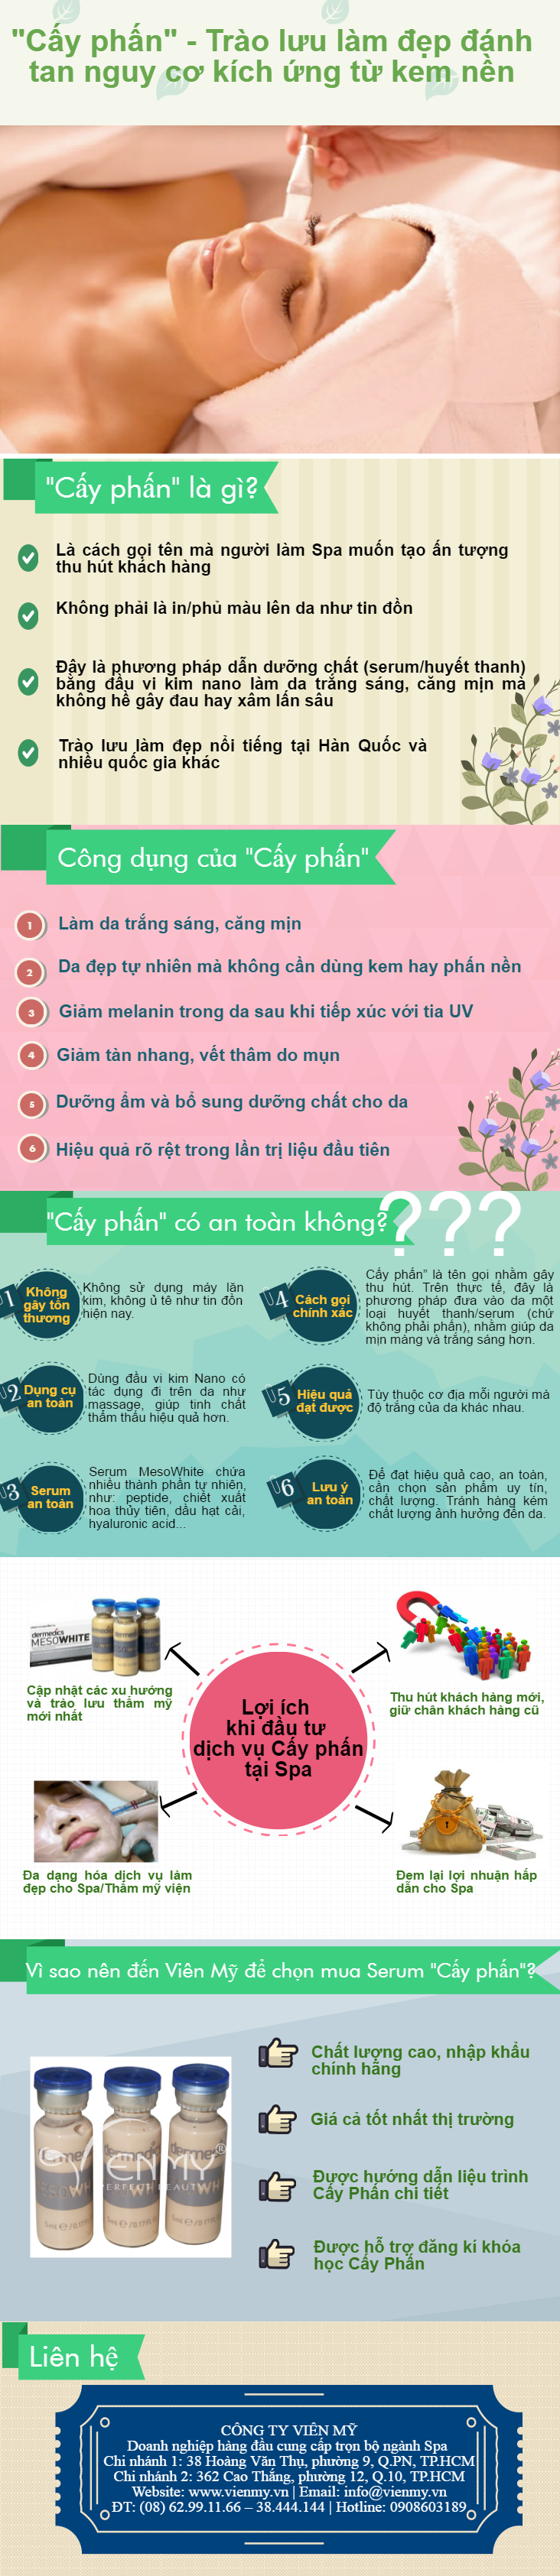 infographic-cay-phan